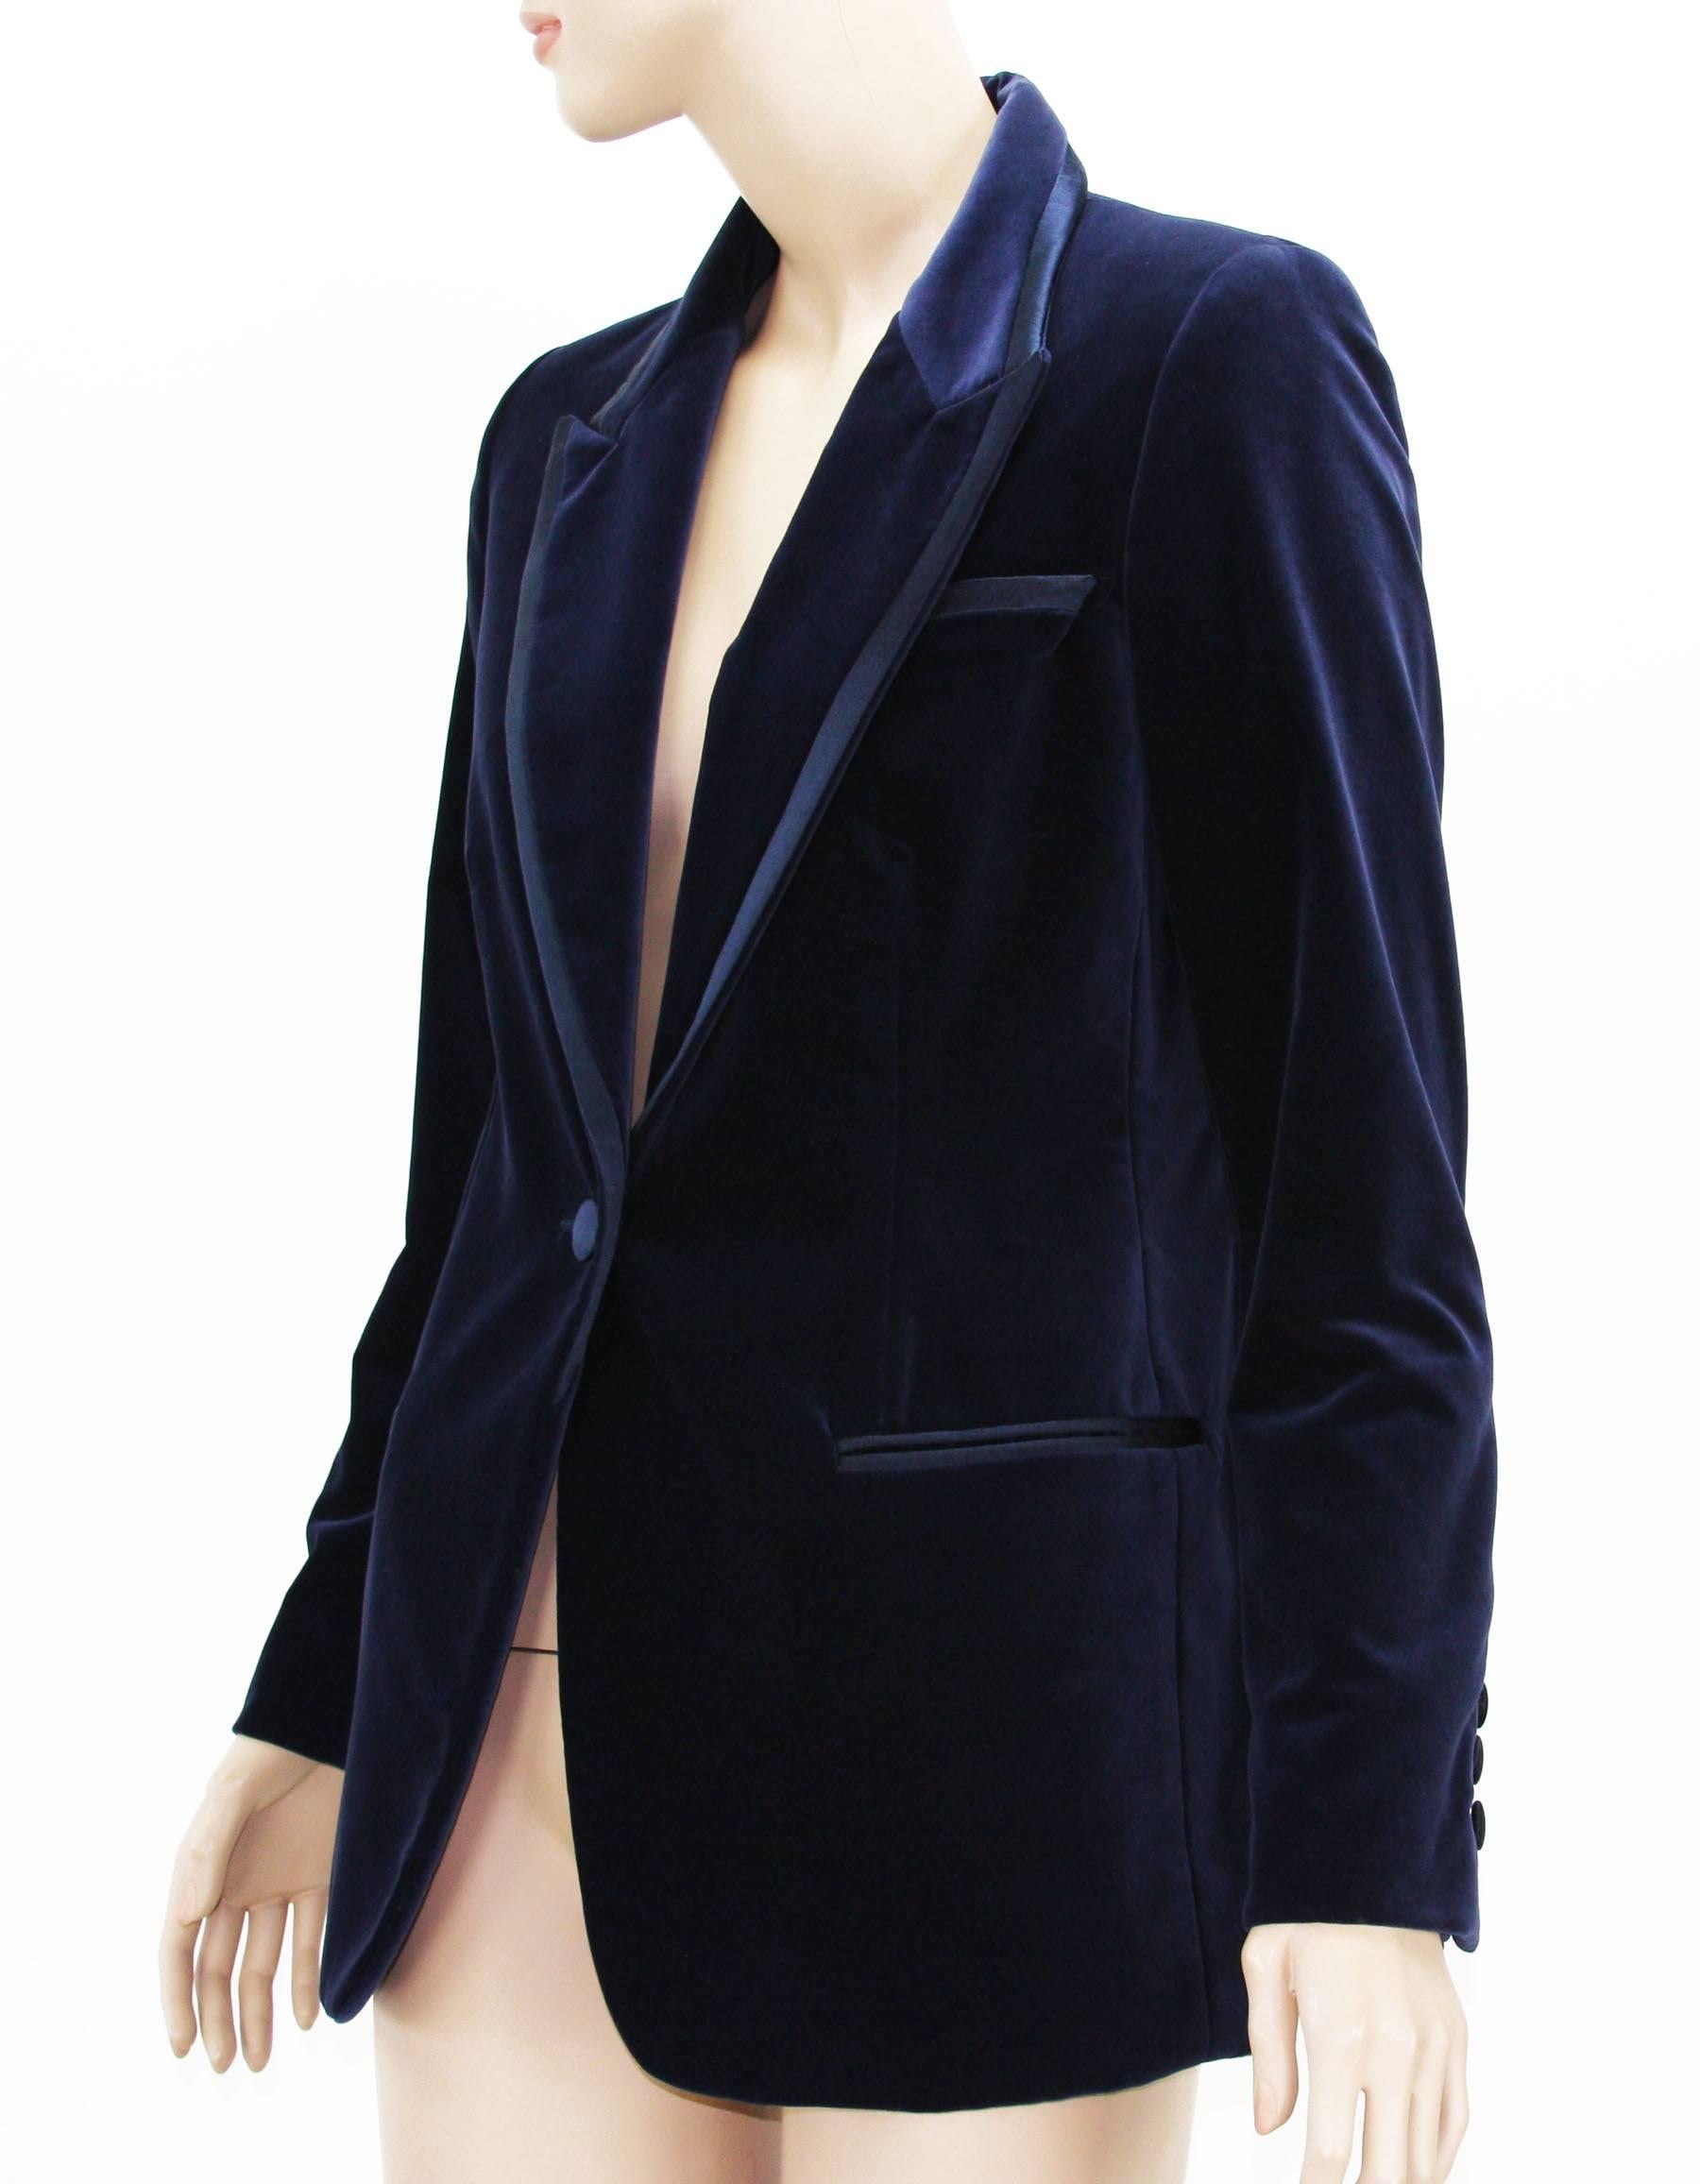 Tom Ford for Gucci Midnight Blue Velvet Tuxedo Blazer
1996 Collection
Designer size 42
Measurements: Length - 28 inches, Sleeve - 24, Bust - 36,  Waist -  32.
Tuxedo style, 3 front pockets, 1 inner pocket, fully lined.
Made in Italy
Excellent